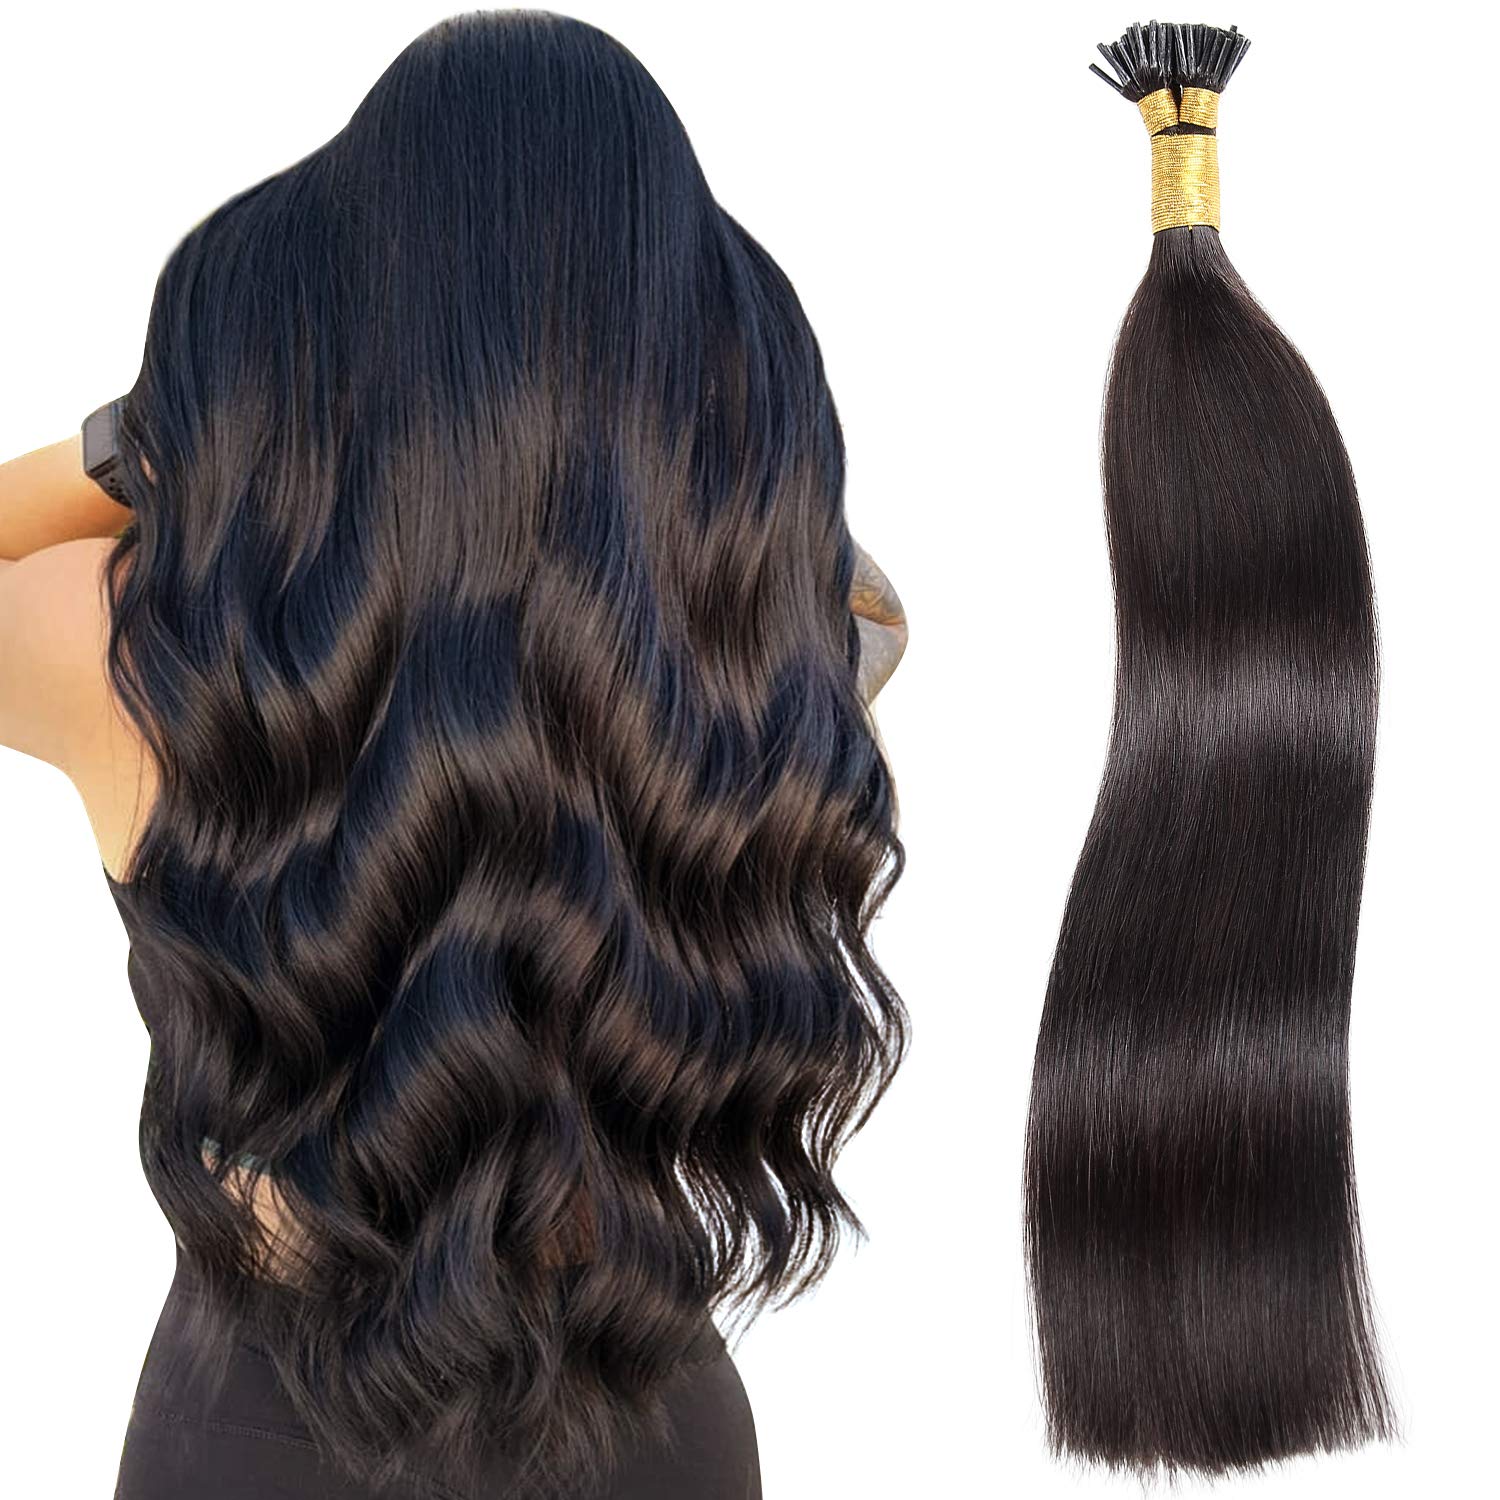 Hair extension market: a money-making market in recent years